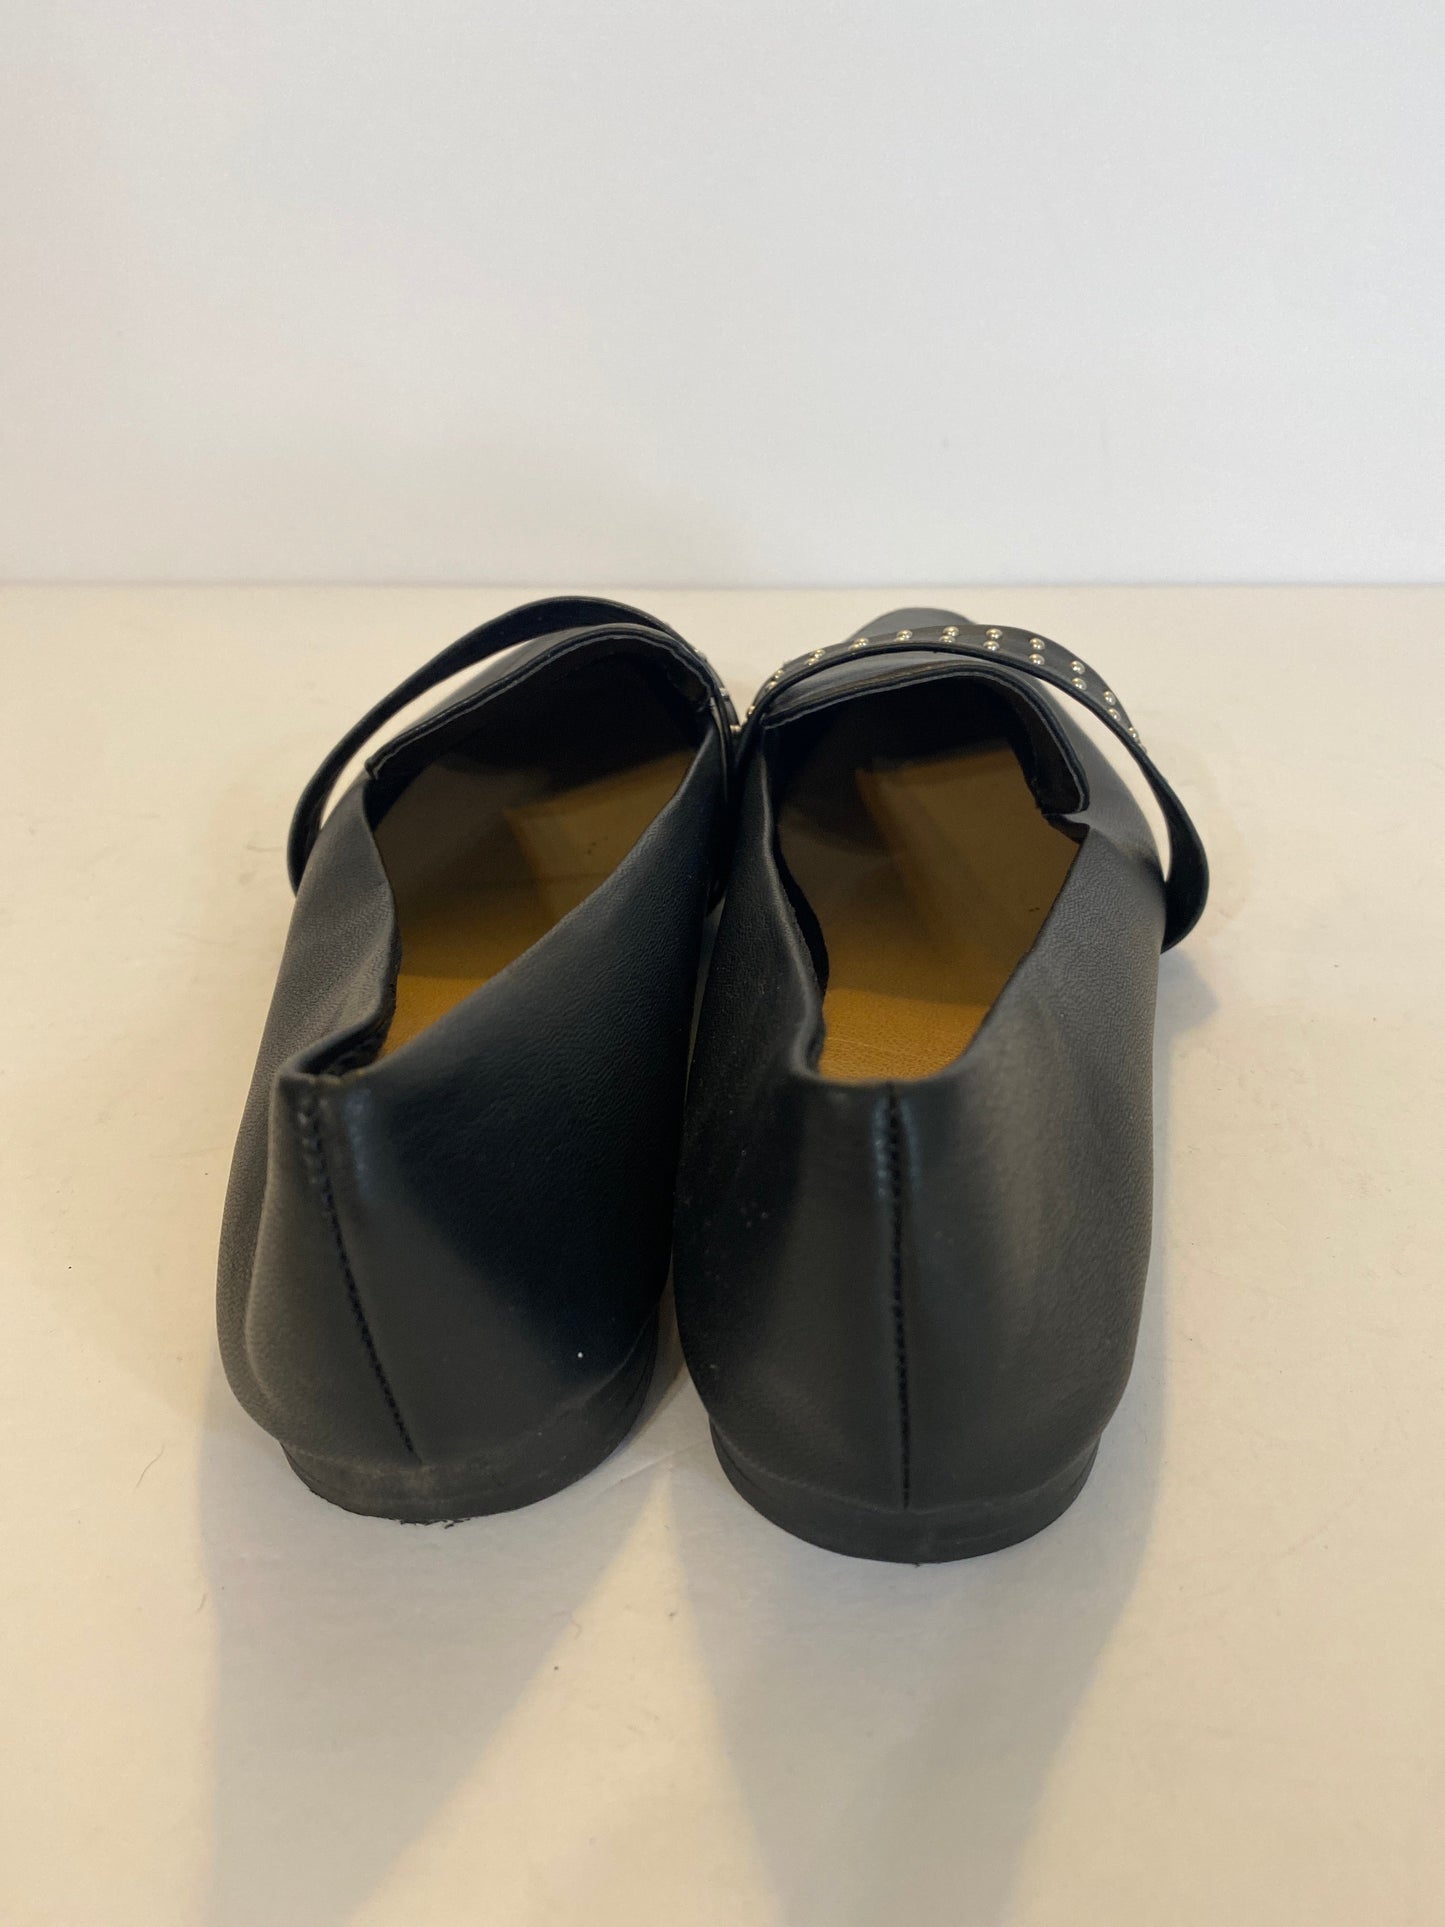 Shoes Flats Ballet By Report  Size: 7